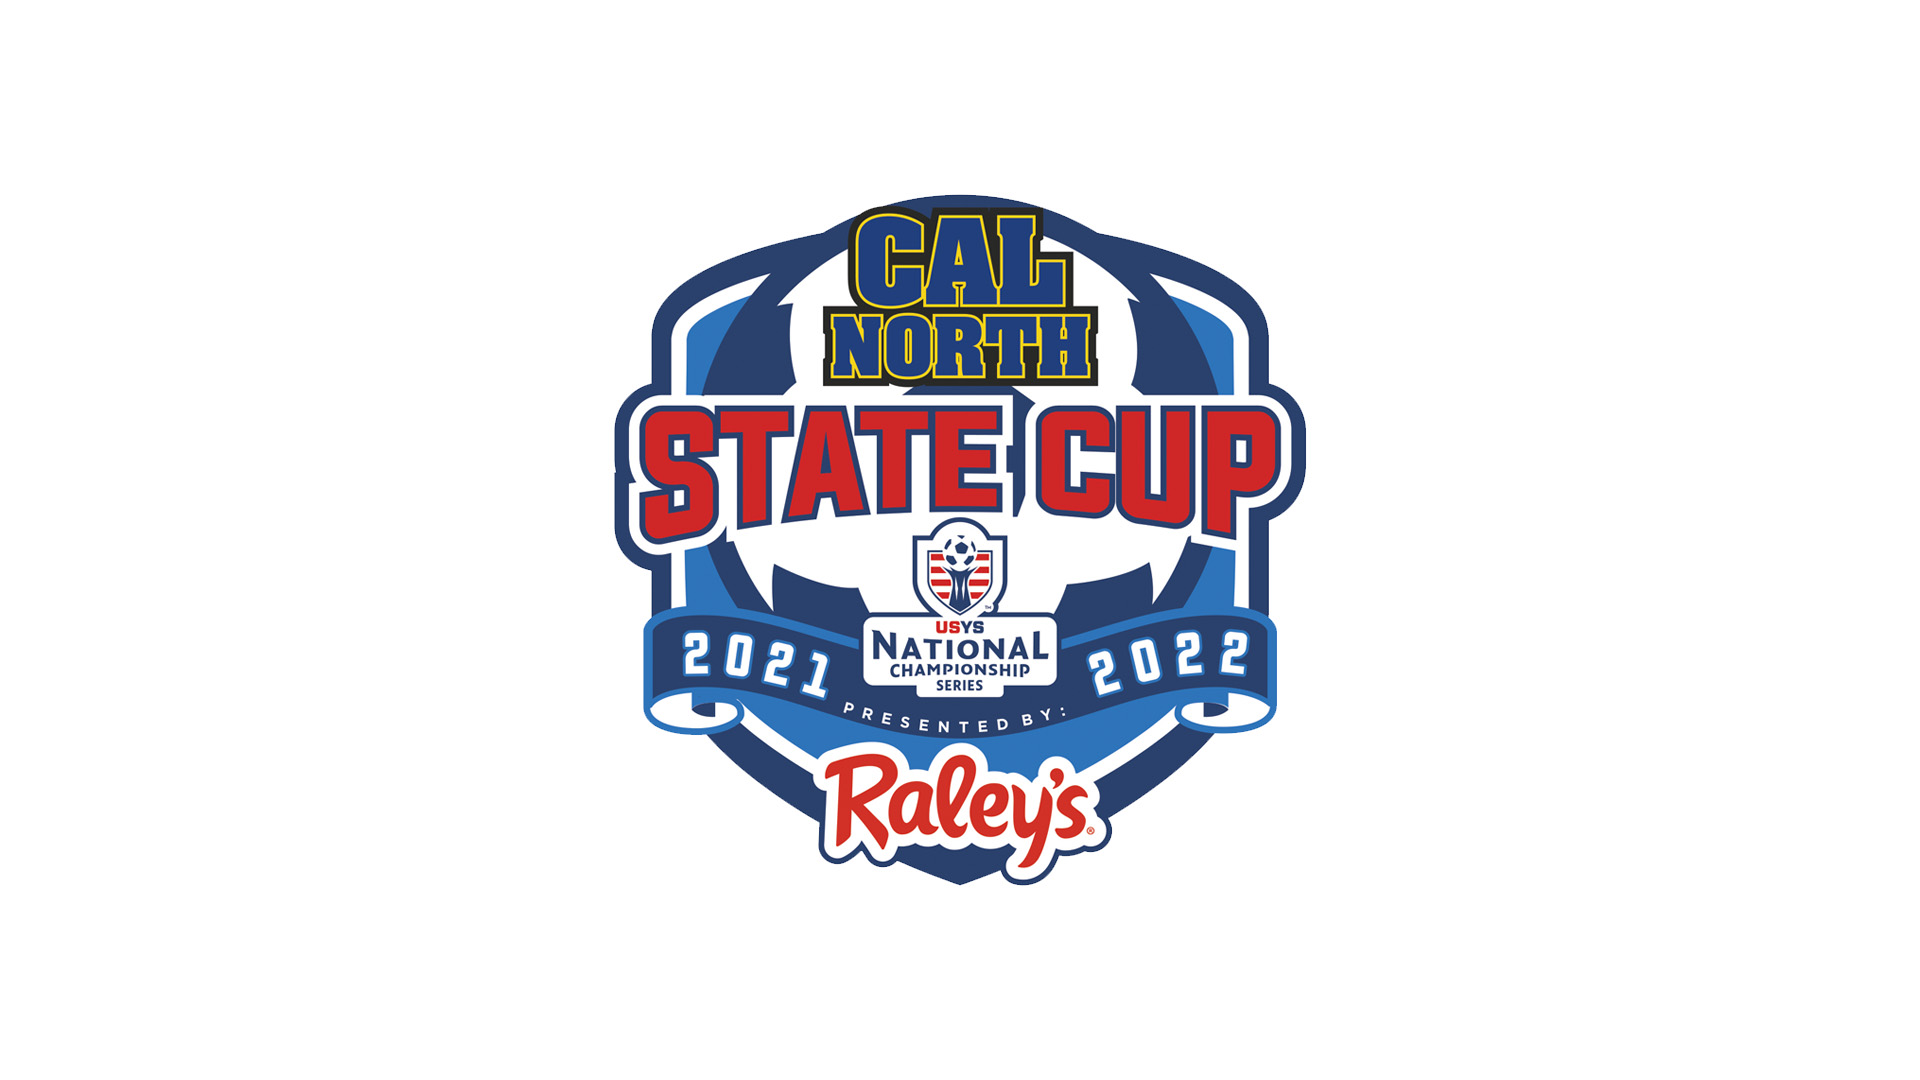 to the Cal North State Cup 2022 presented by Raley's